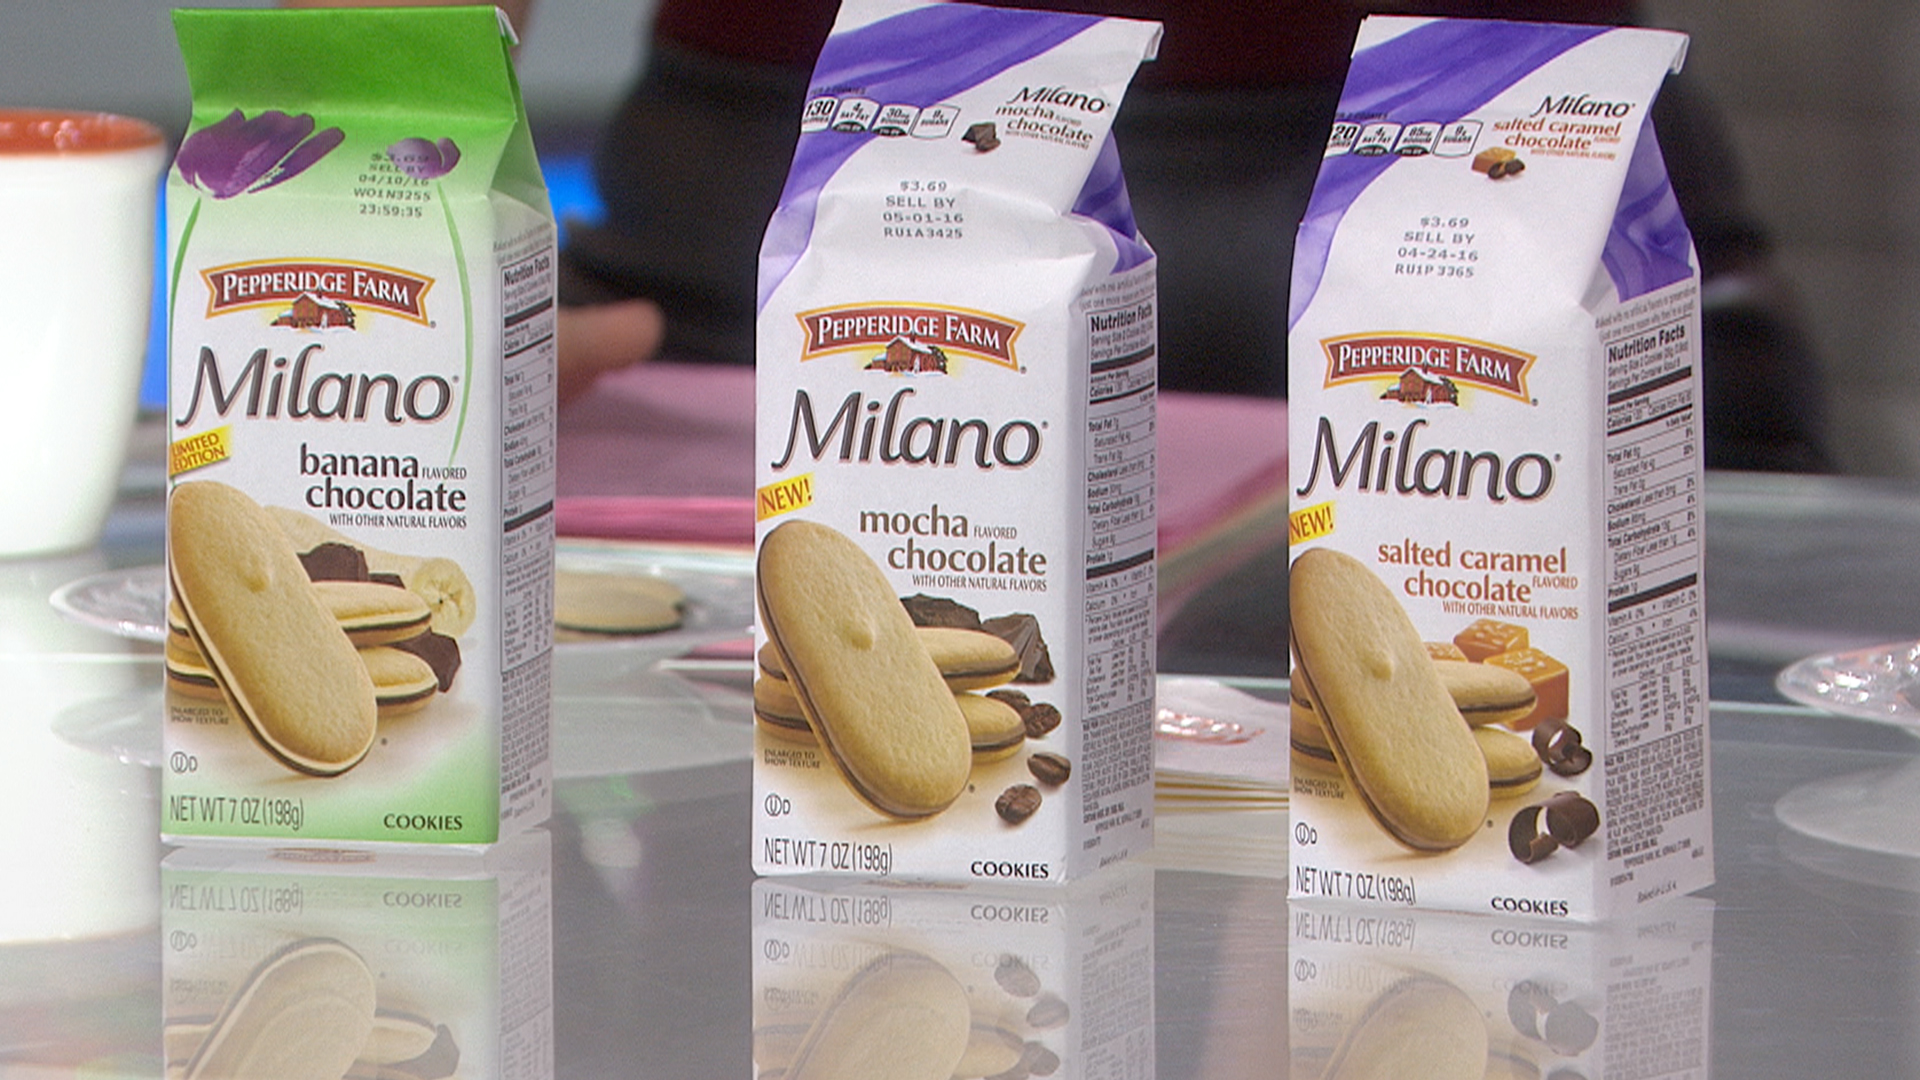 Milano cookies release 3 new flavors, including Salted Caramel